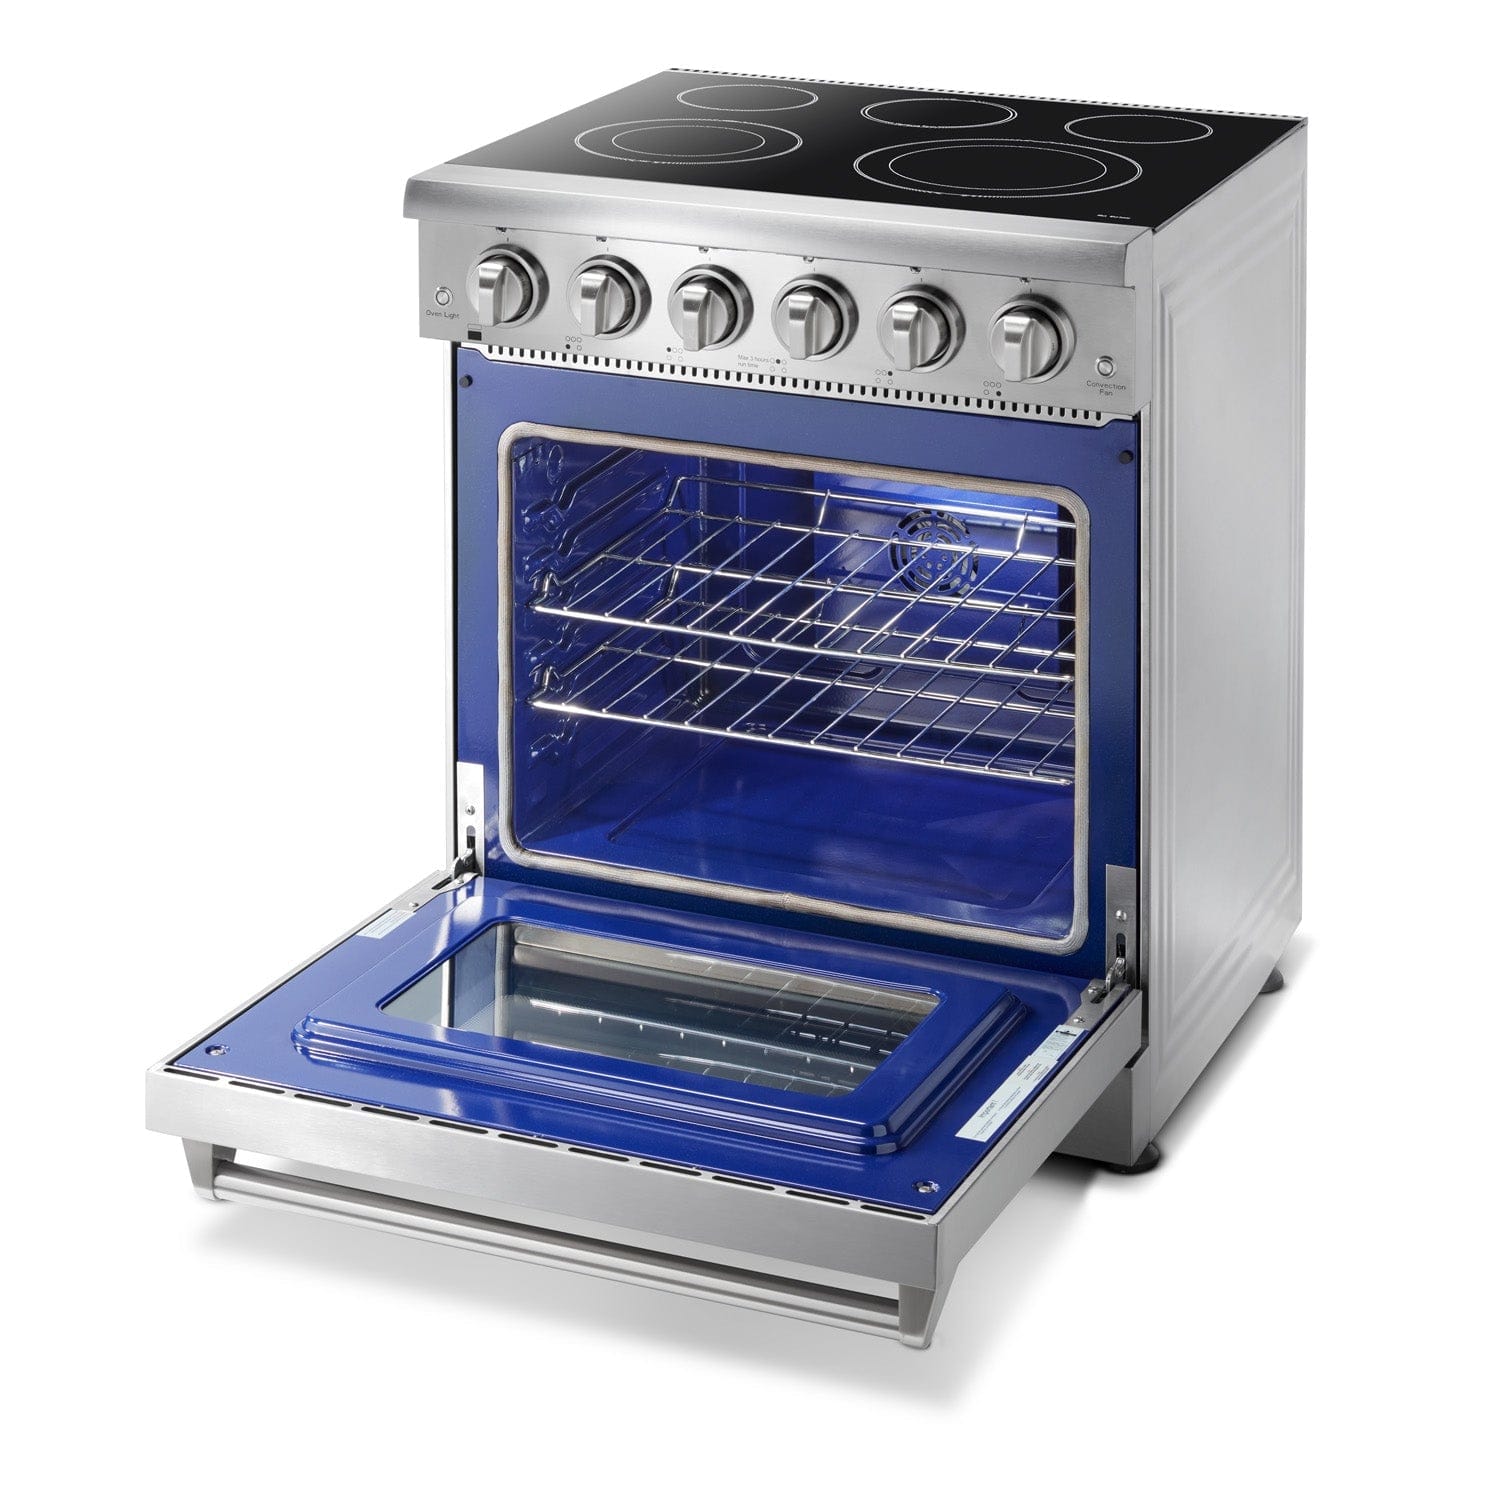 Thor Kitchen 30 in. Electric Range in Stainless Steel HRE3001 Ranges HRE3001 Luxury Appliances Direct